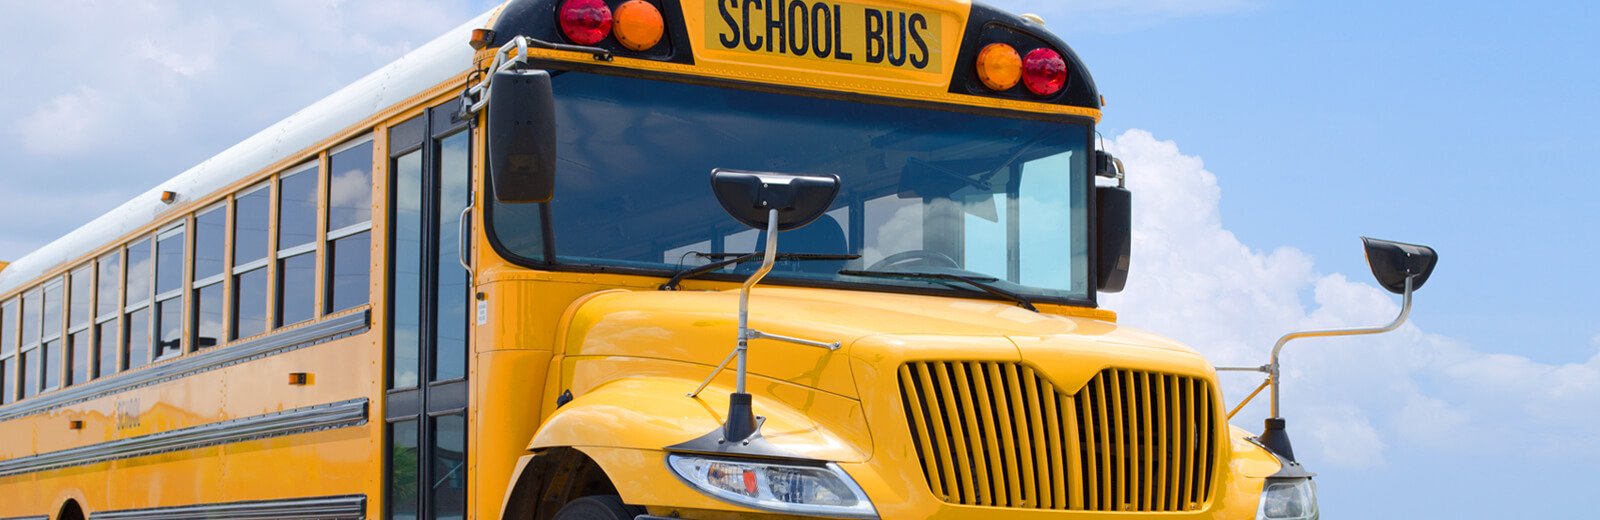 close up image of school bus front